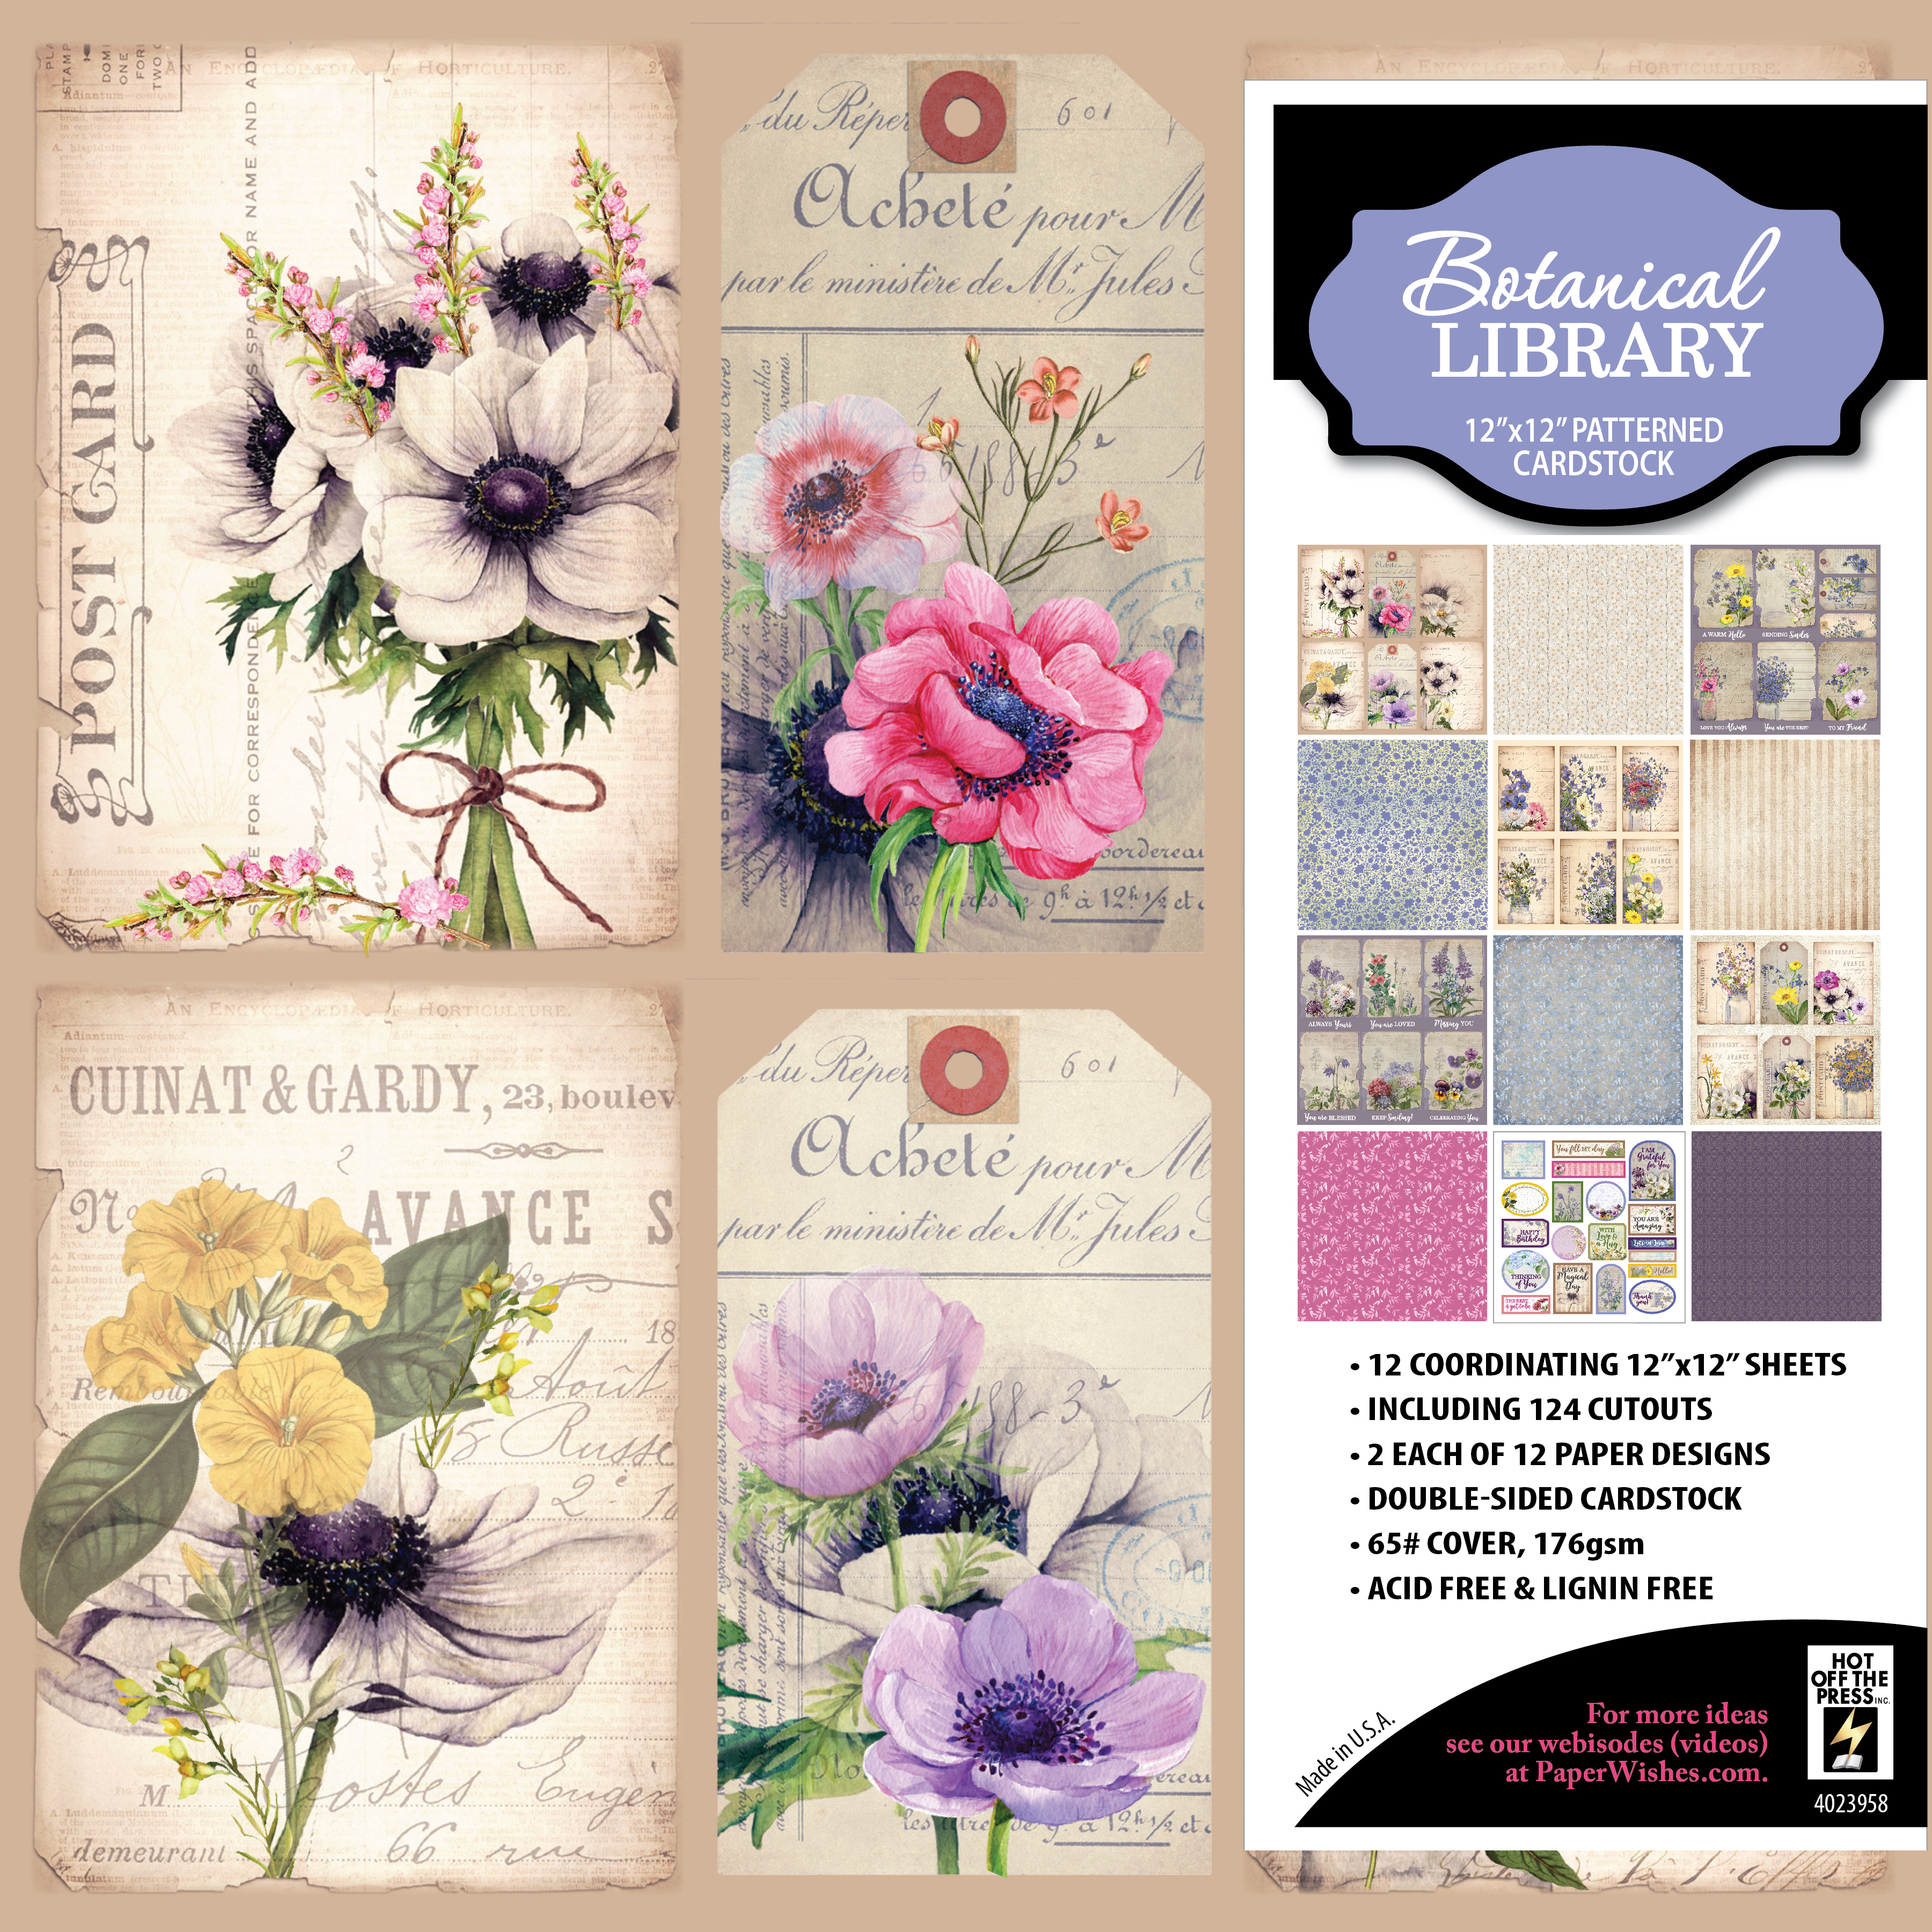 Botanical Library 12x12 Patterned Cardstock